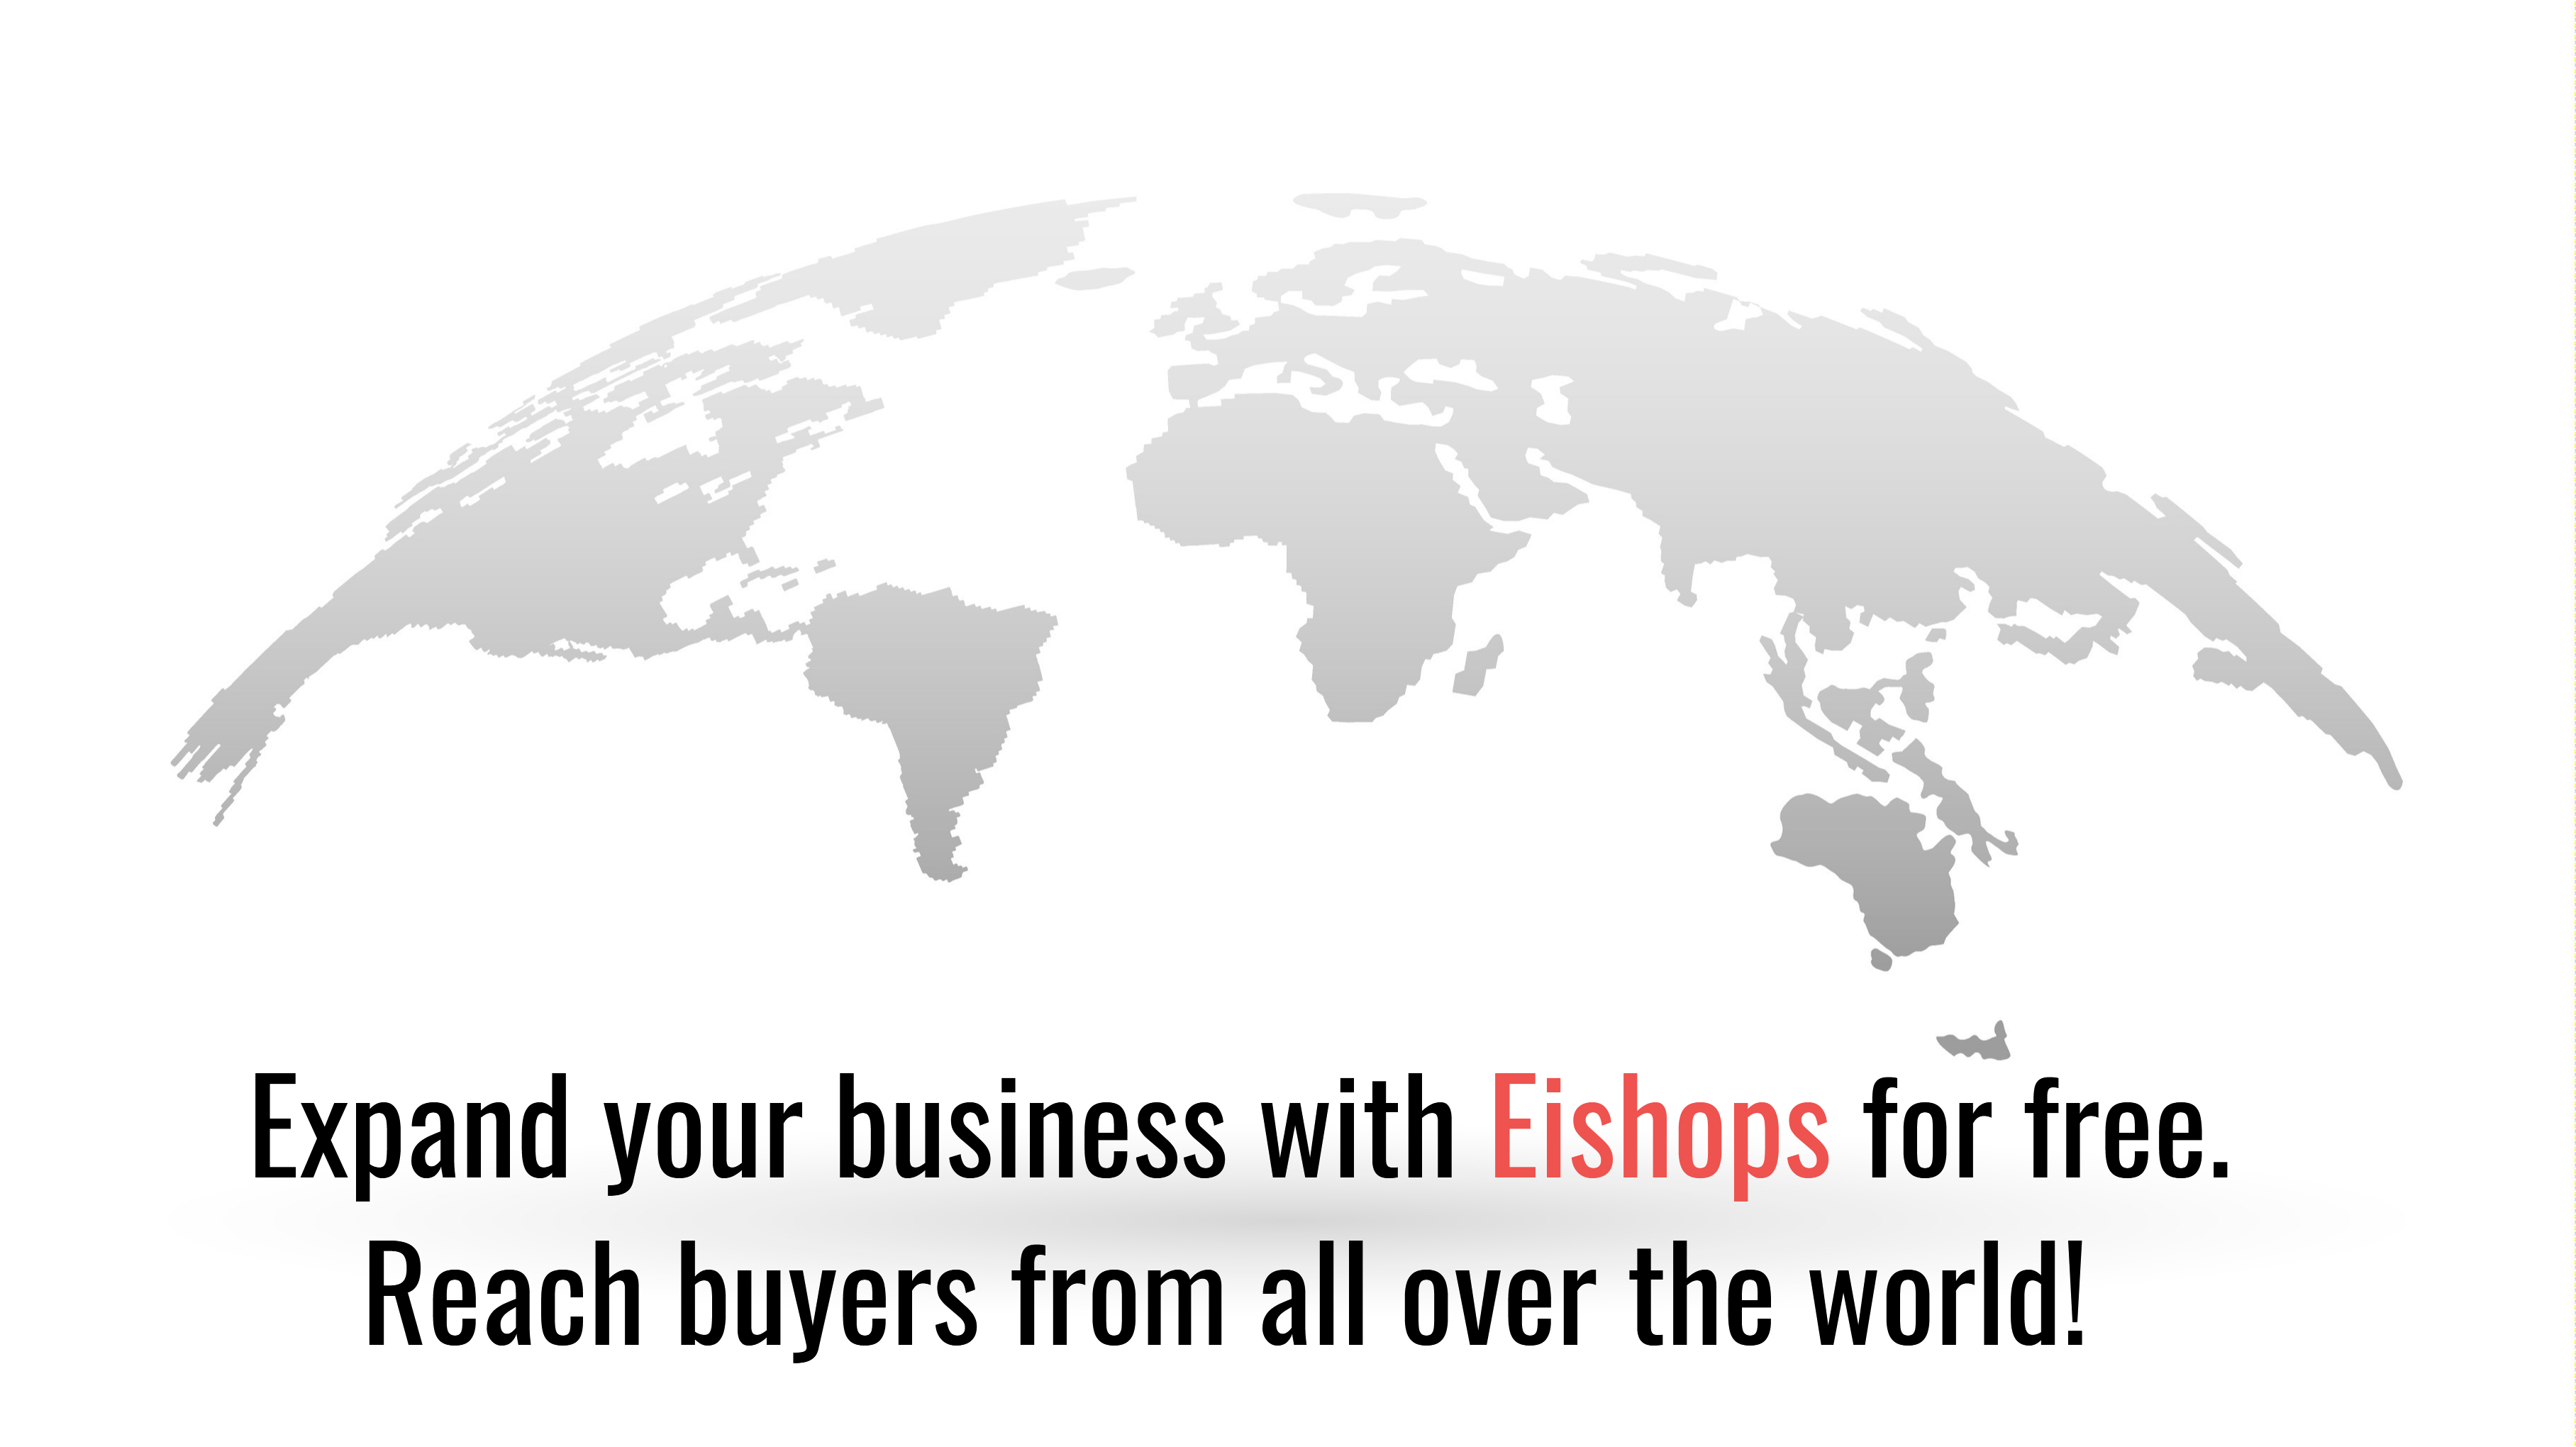 expand your business with Eishops for free. reach buyers from all over the world